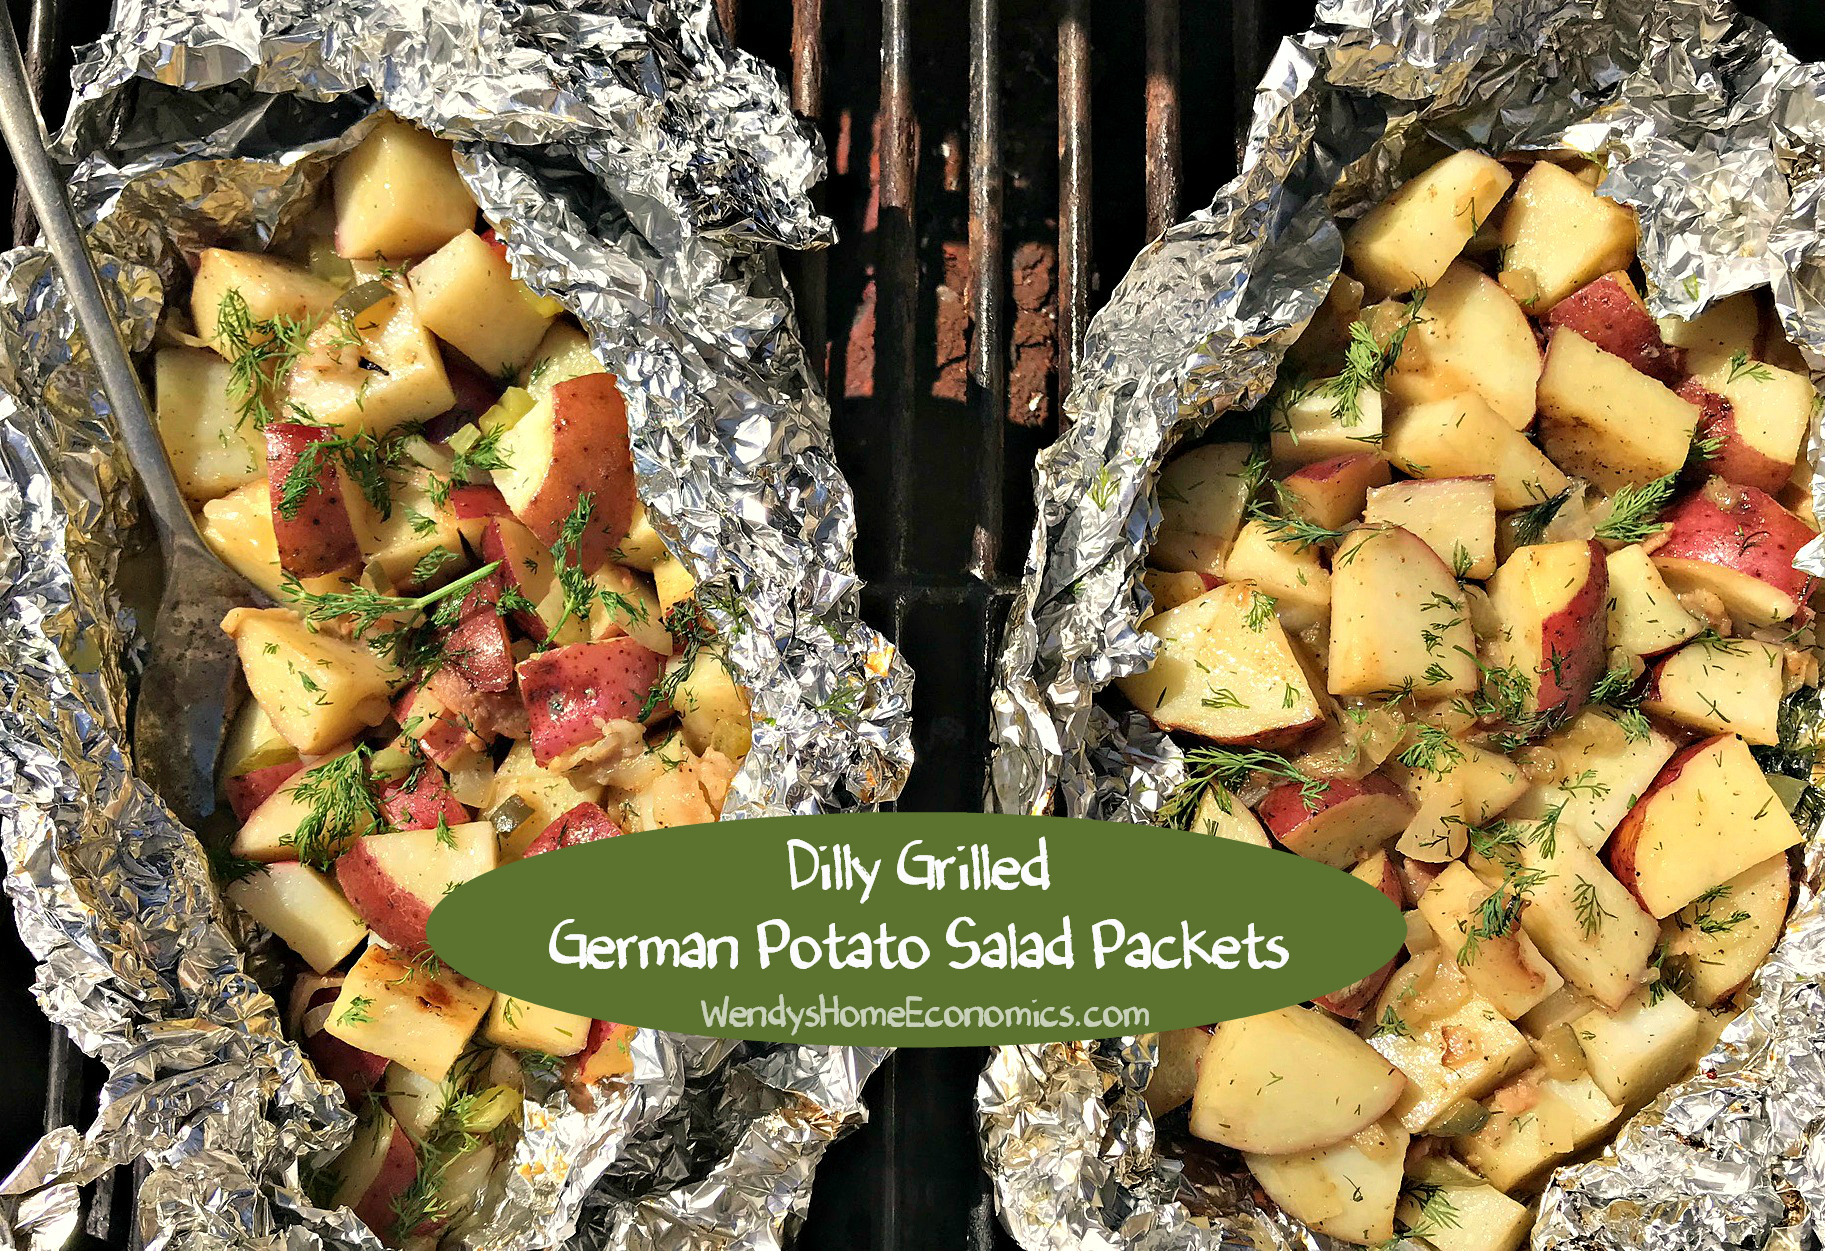 Dilly Grilled German Potato Salad Packets